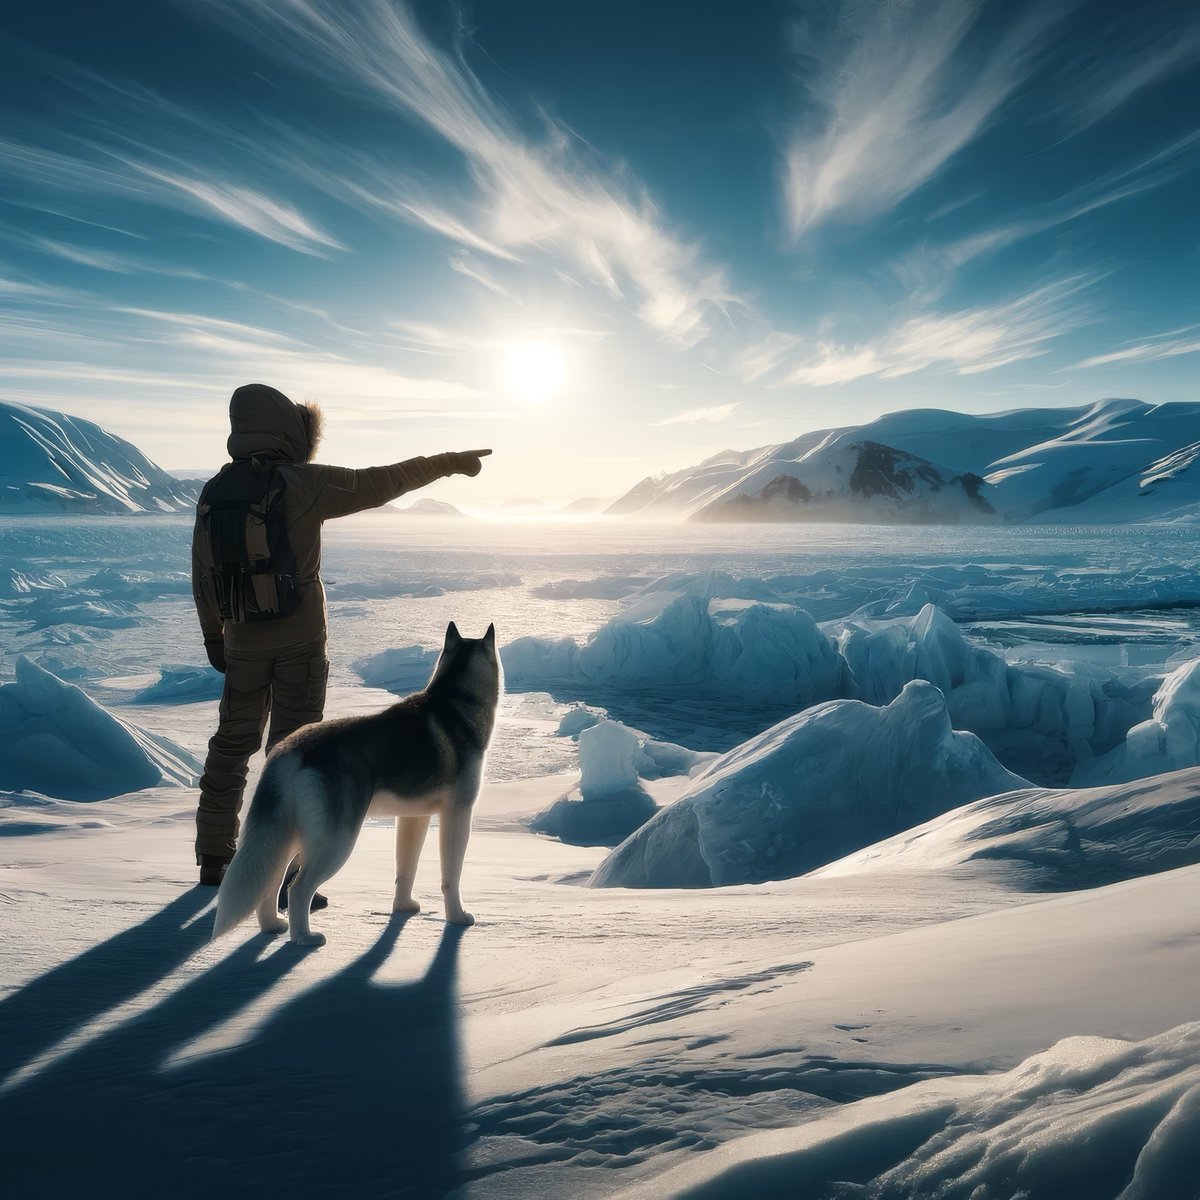 Good afternoon from the Arctic! ☀️ Even the mightiest glaciers evolve, and so do we. Sisu and I traverse this ever-changing landscape, finding new trails in the familiar. Adaptation is our greatest skill. 🐾 Embrace change, for it is the path to new discoveries. ✨